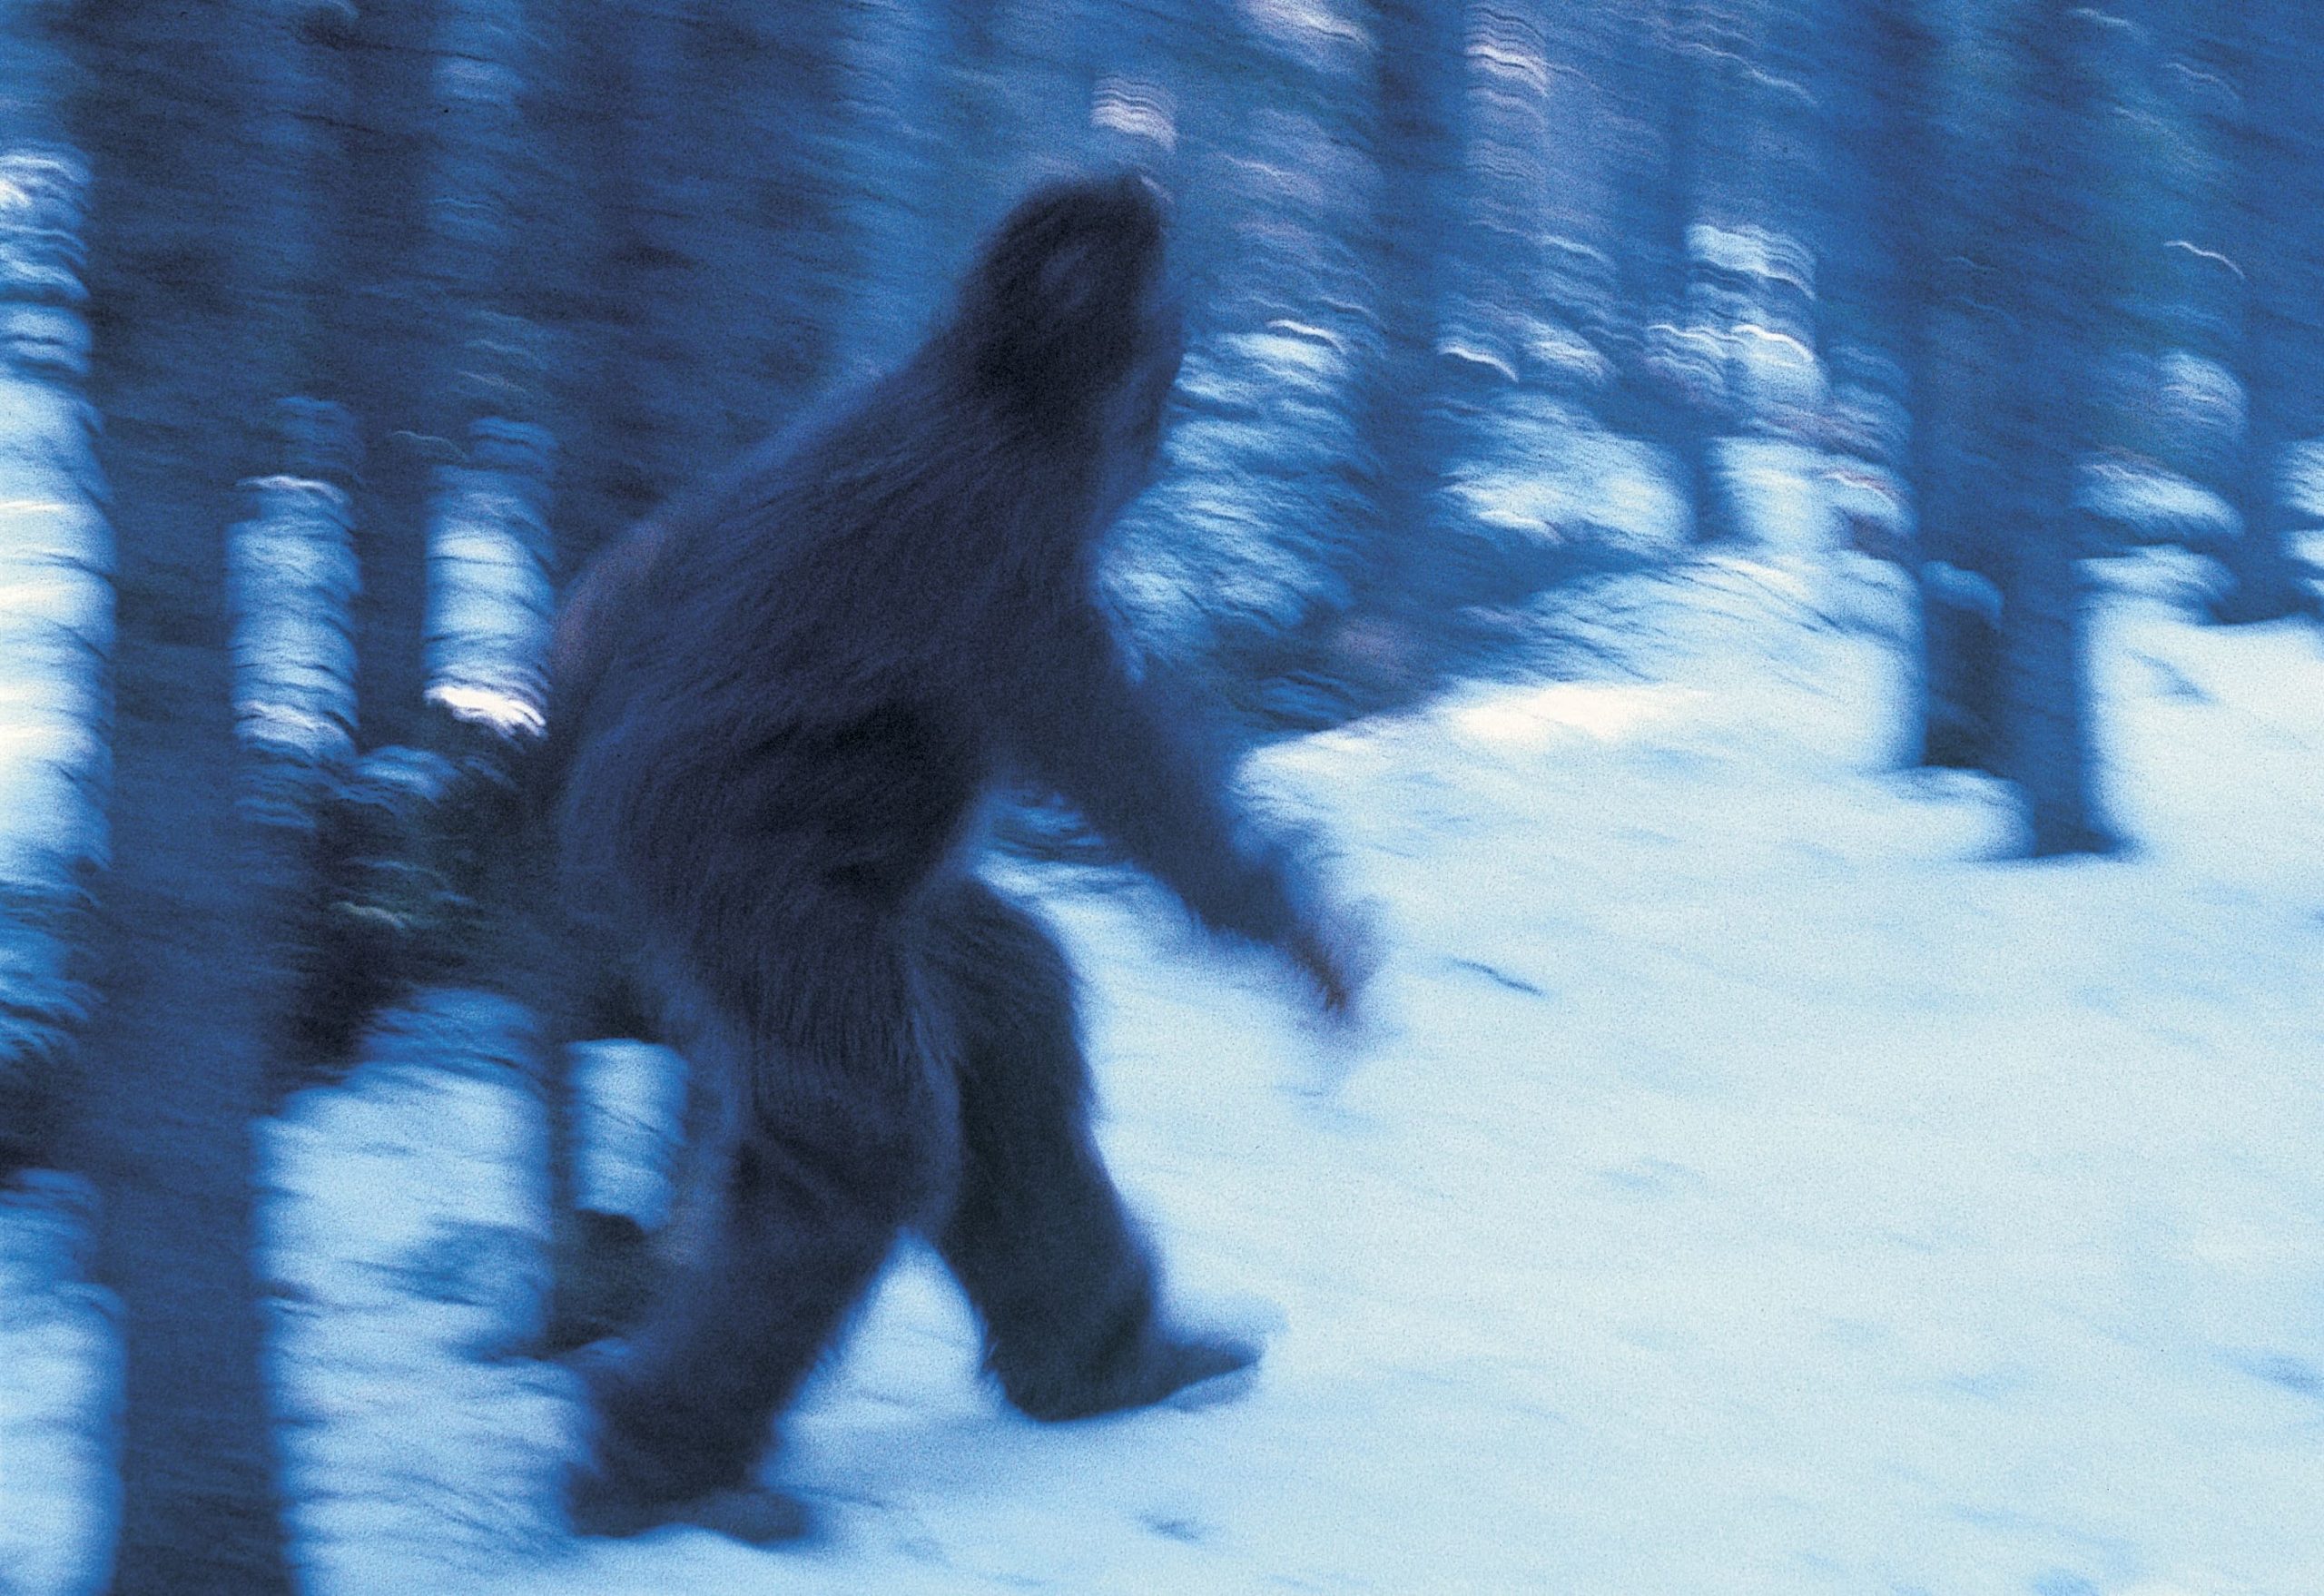 New sighting of Bigfoot And what do the experts think?